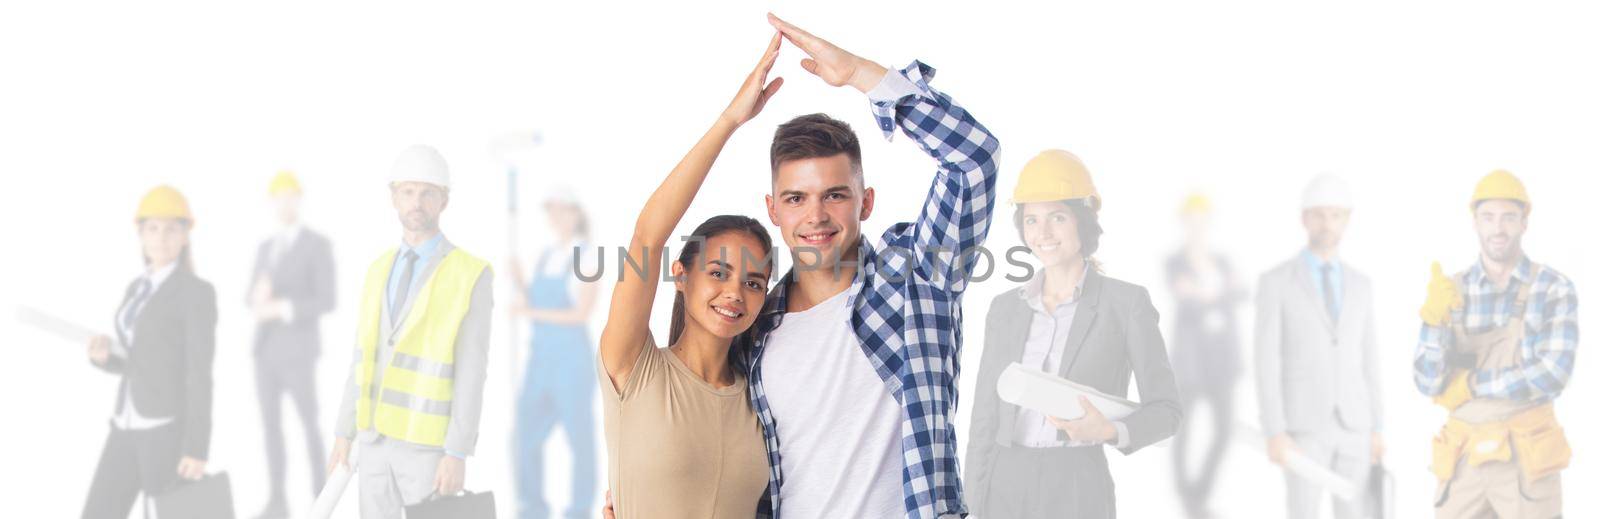 Couple making roof with hands symbol of new home and team of construction workers. Isolated on white background